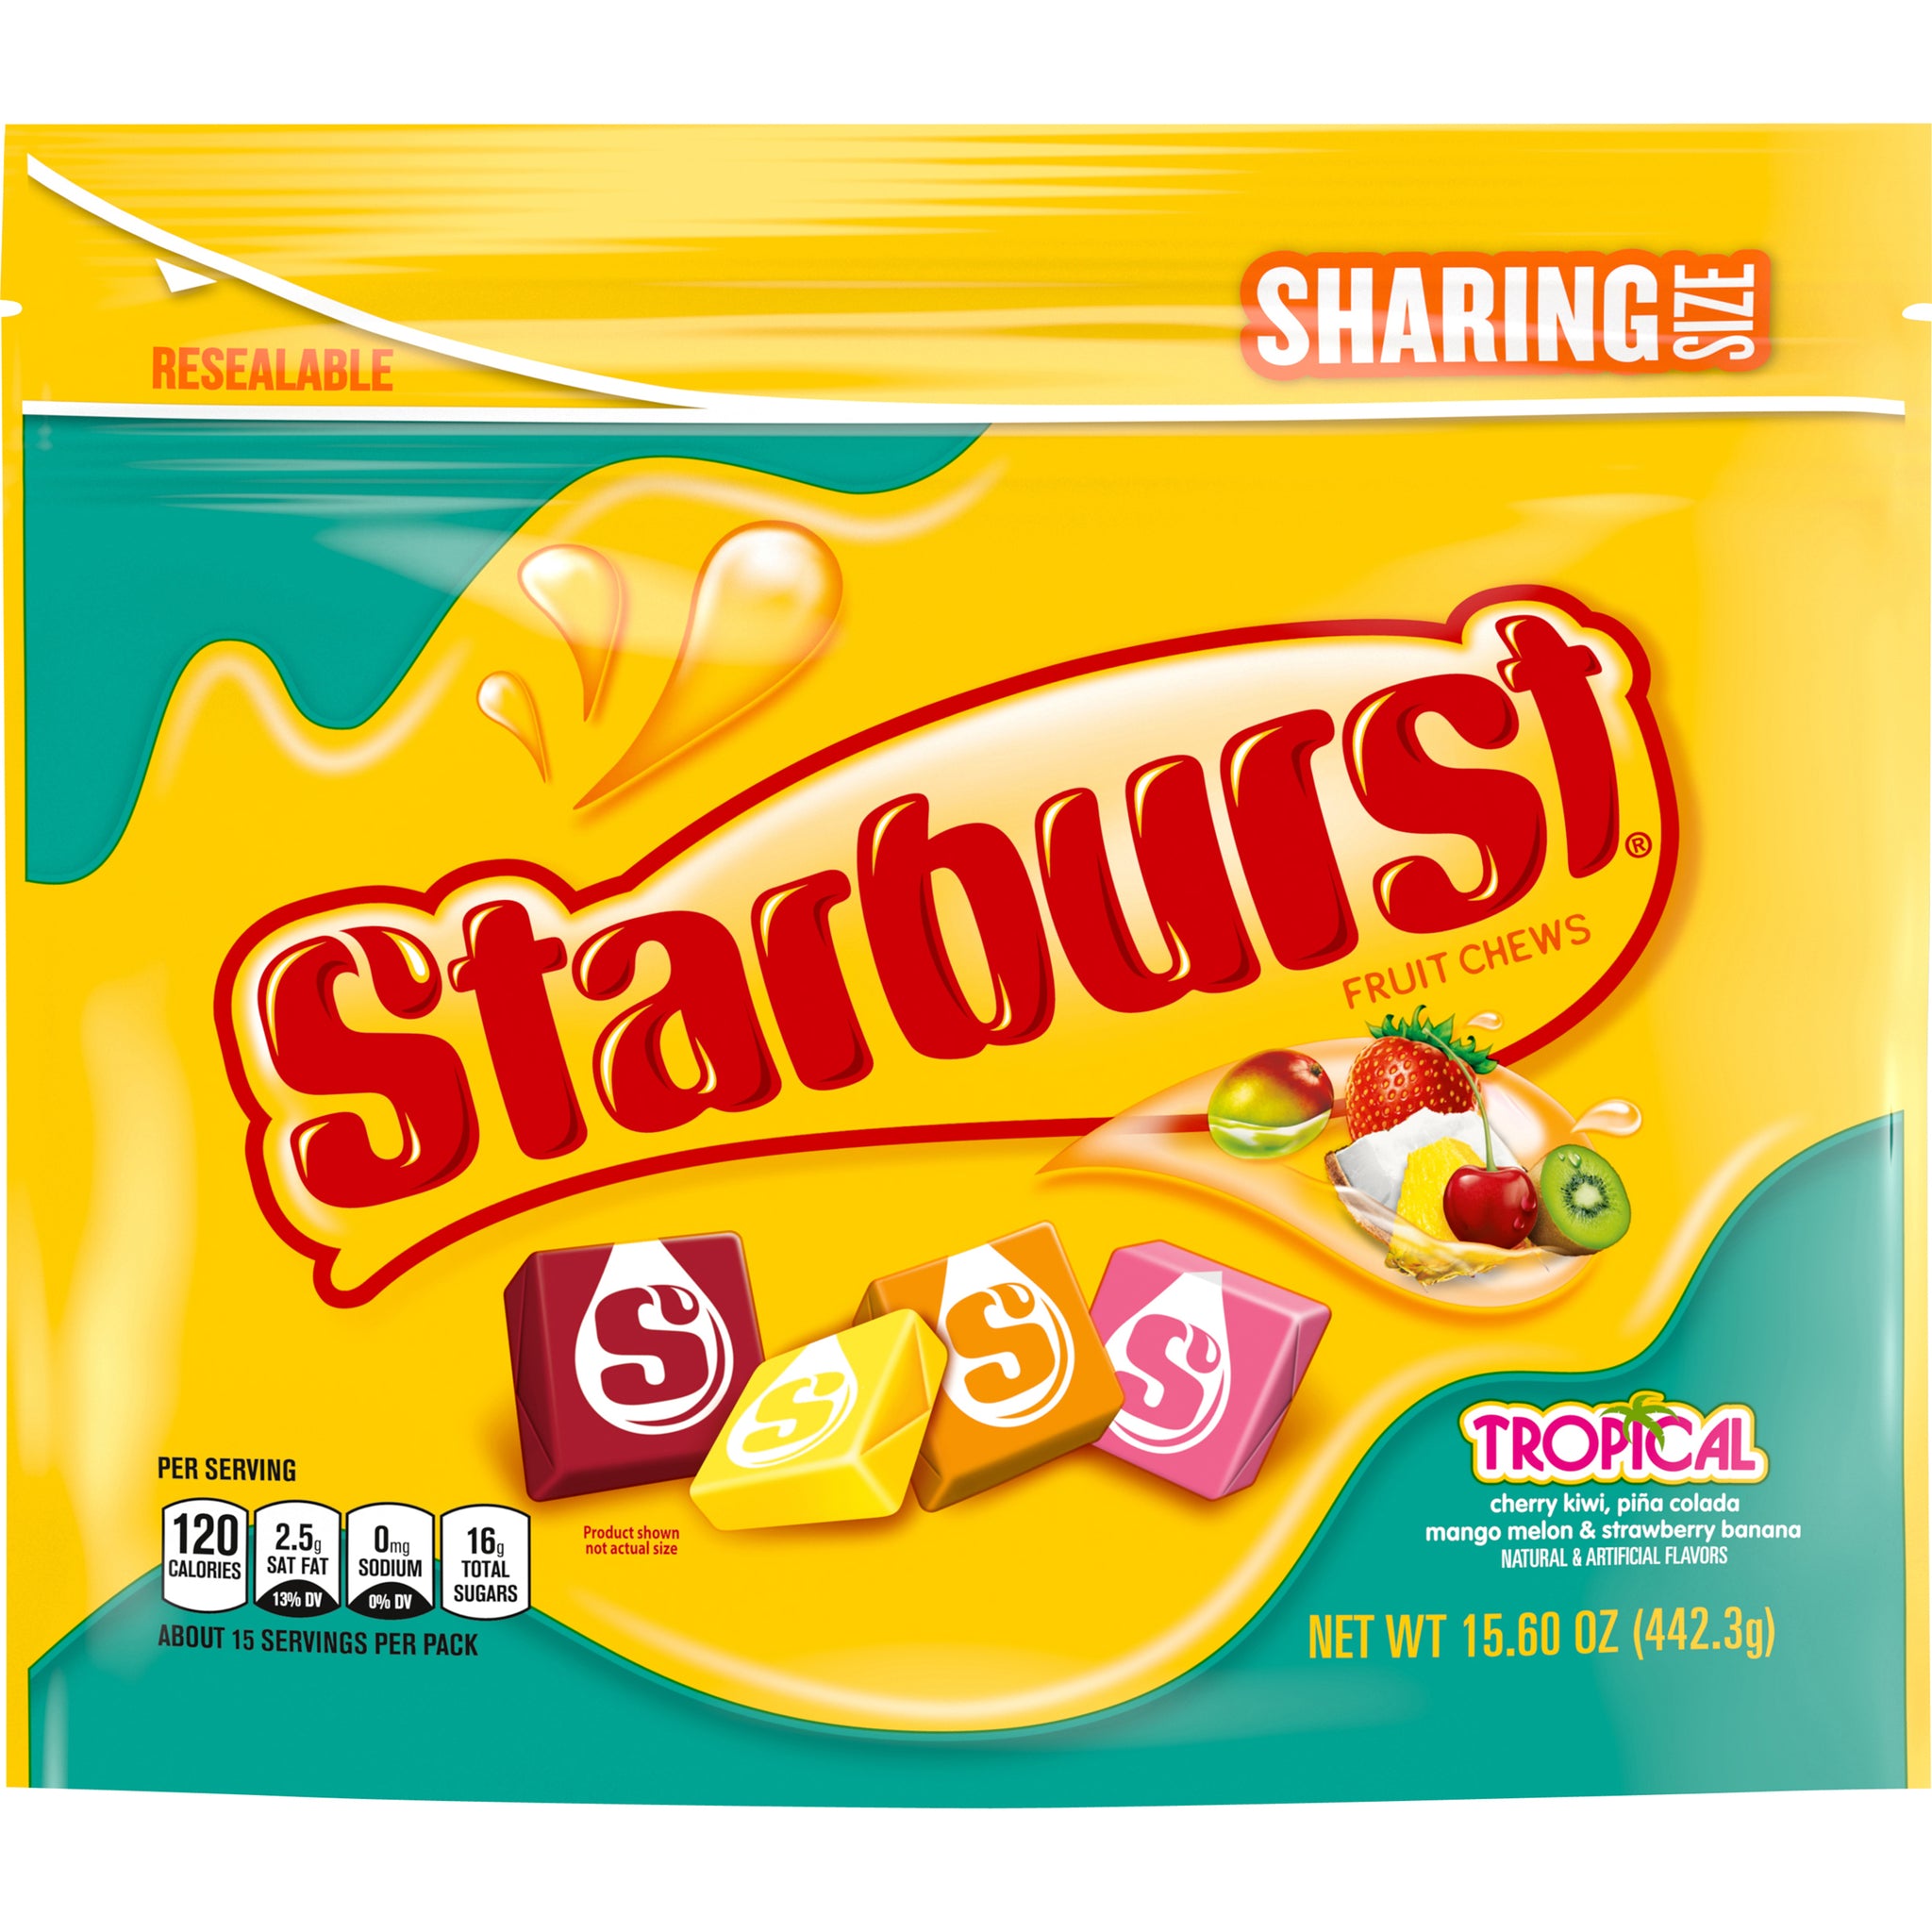 Starburst Tropical Chewy Candy, 15.6oz